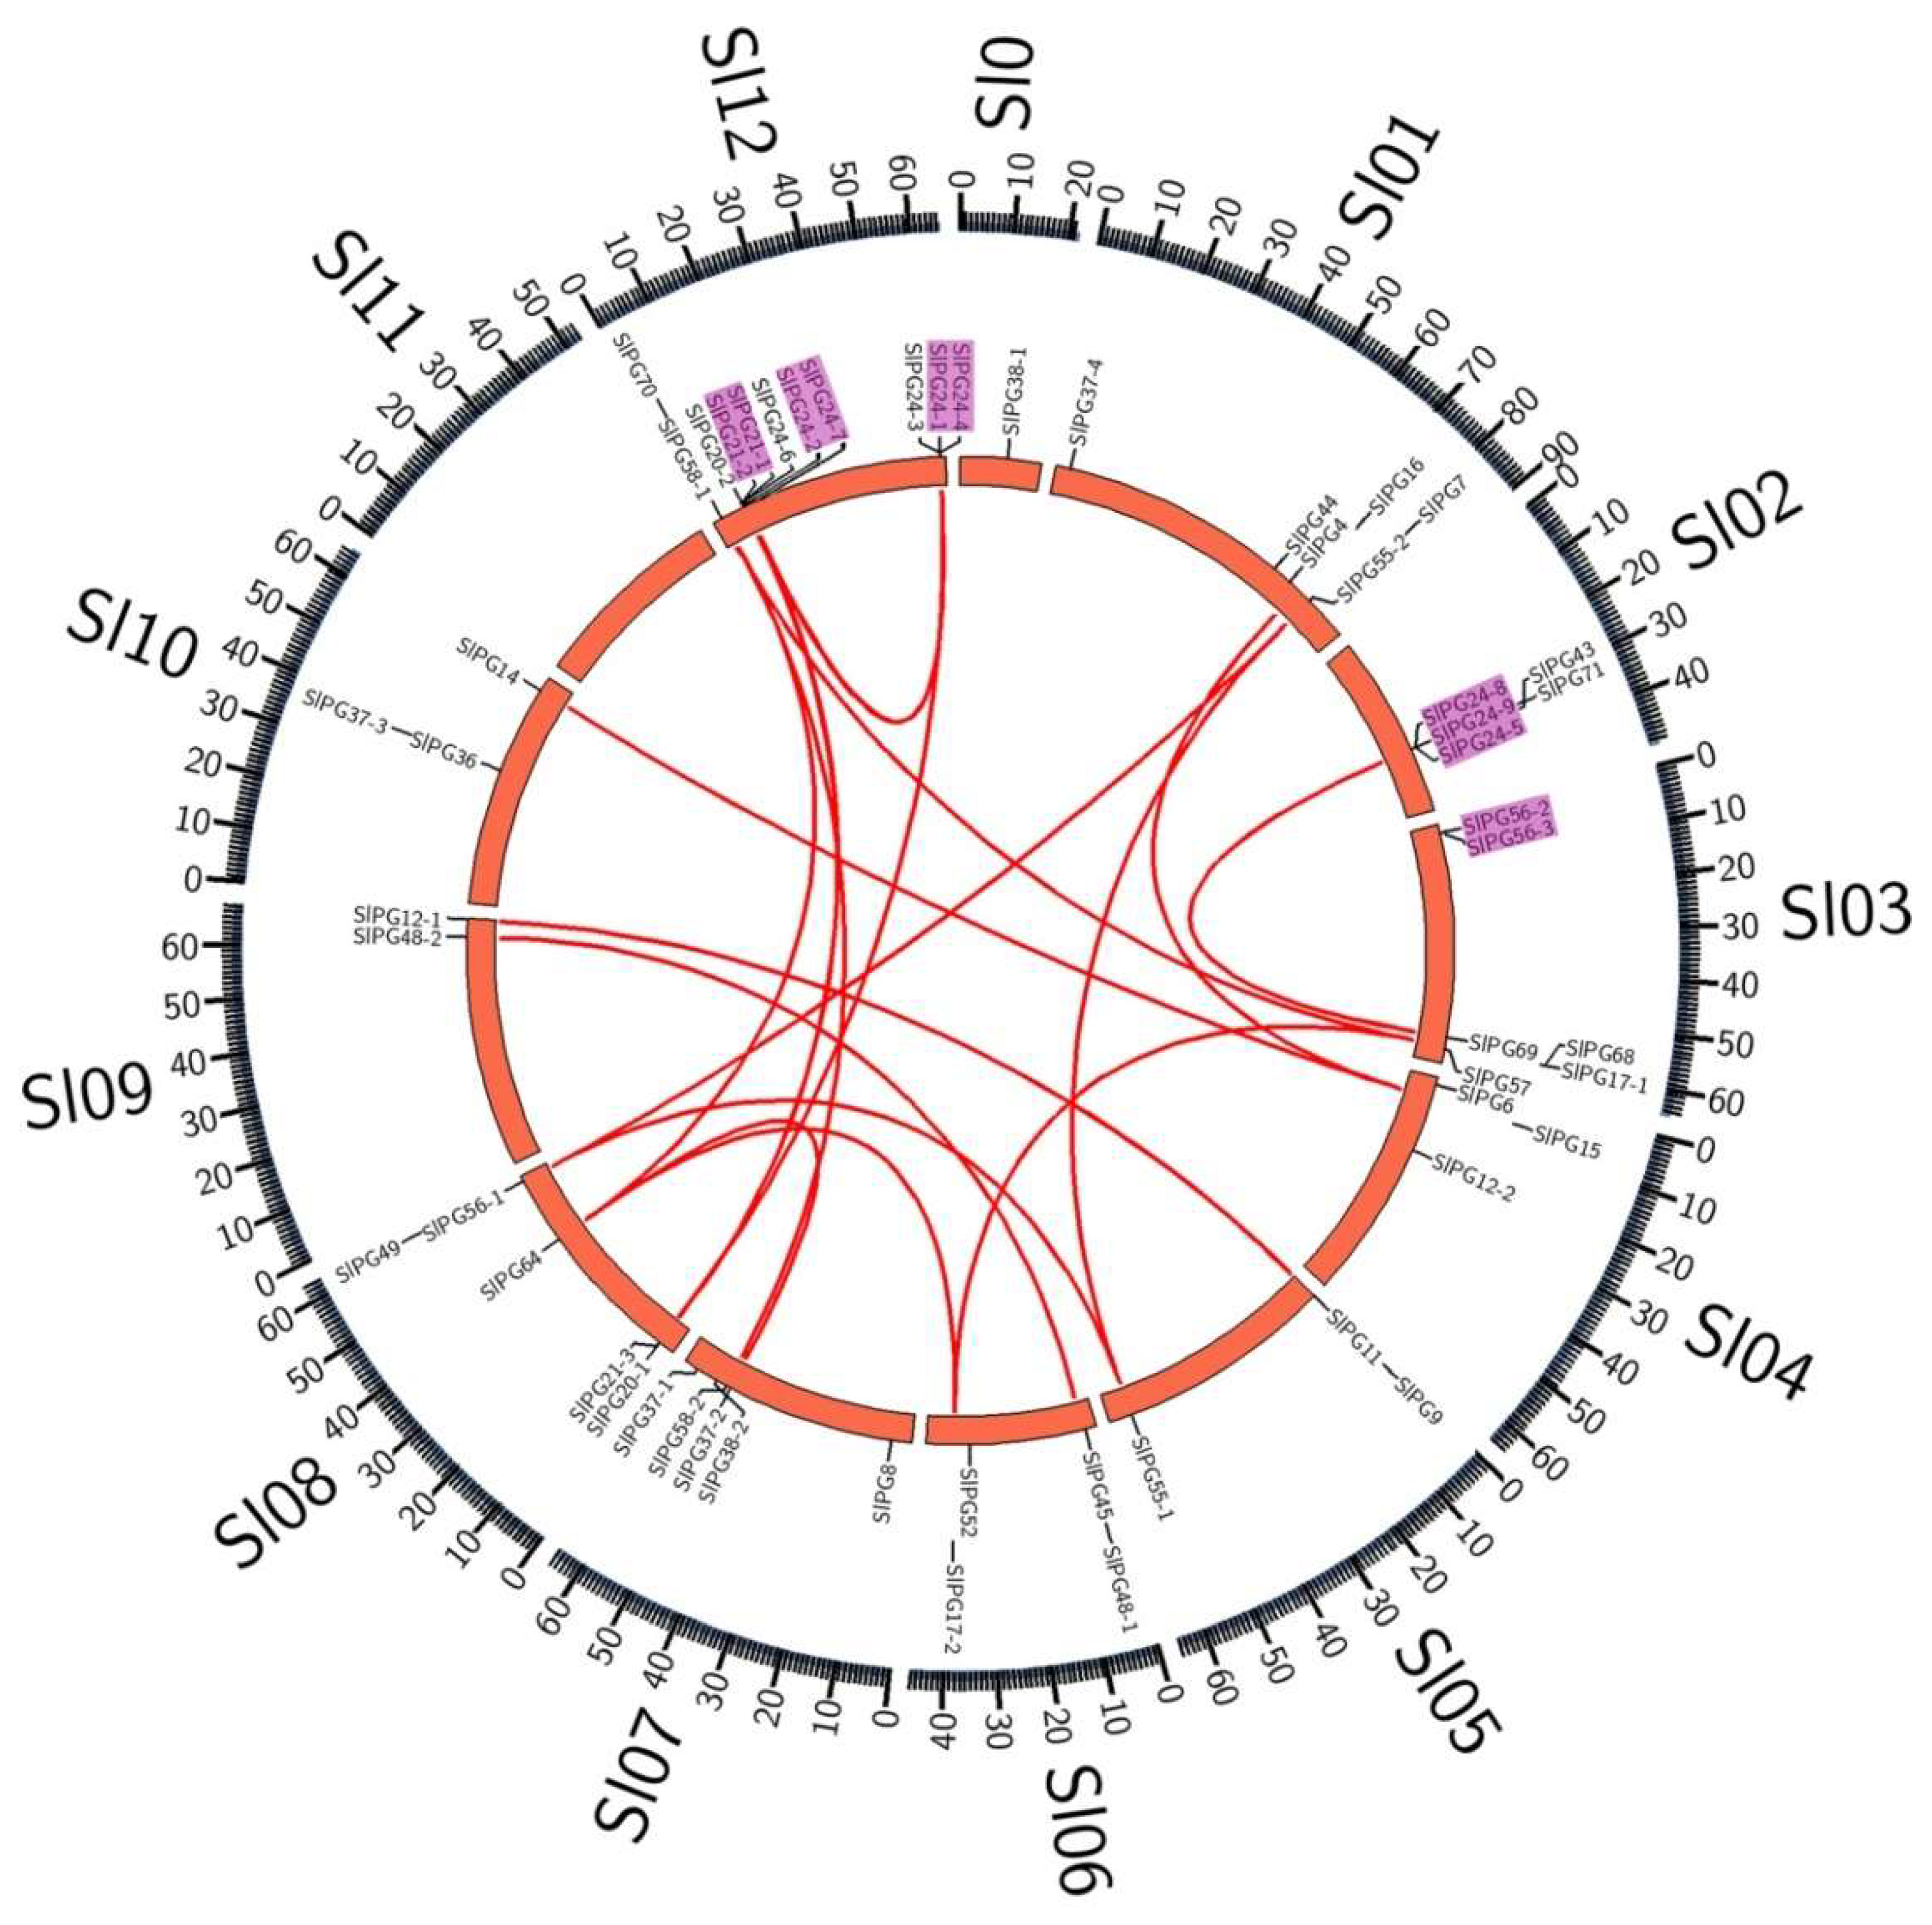 Ijms Free Full Text Genome Wide Identification And Analysis Of